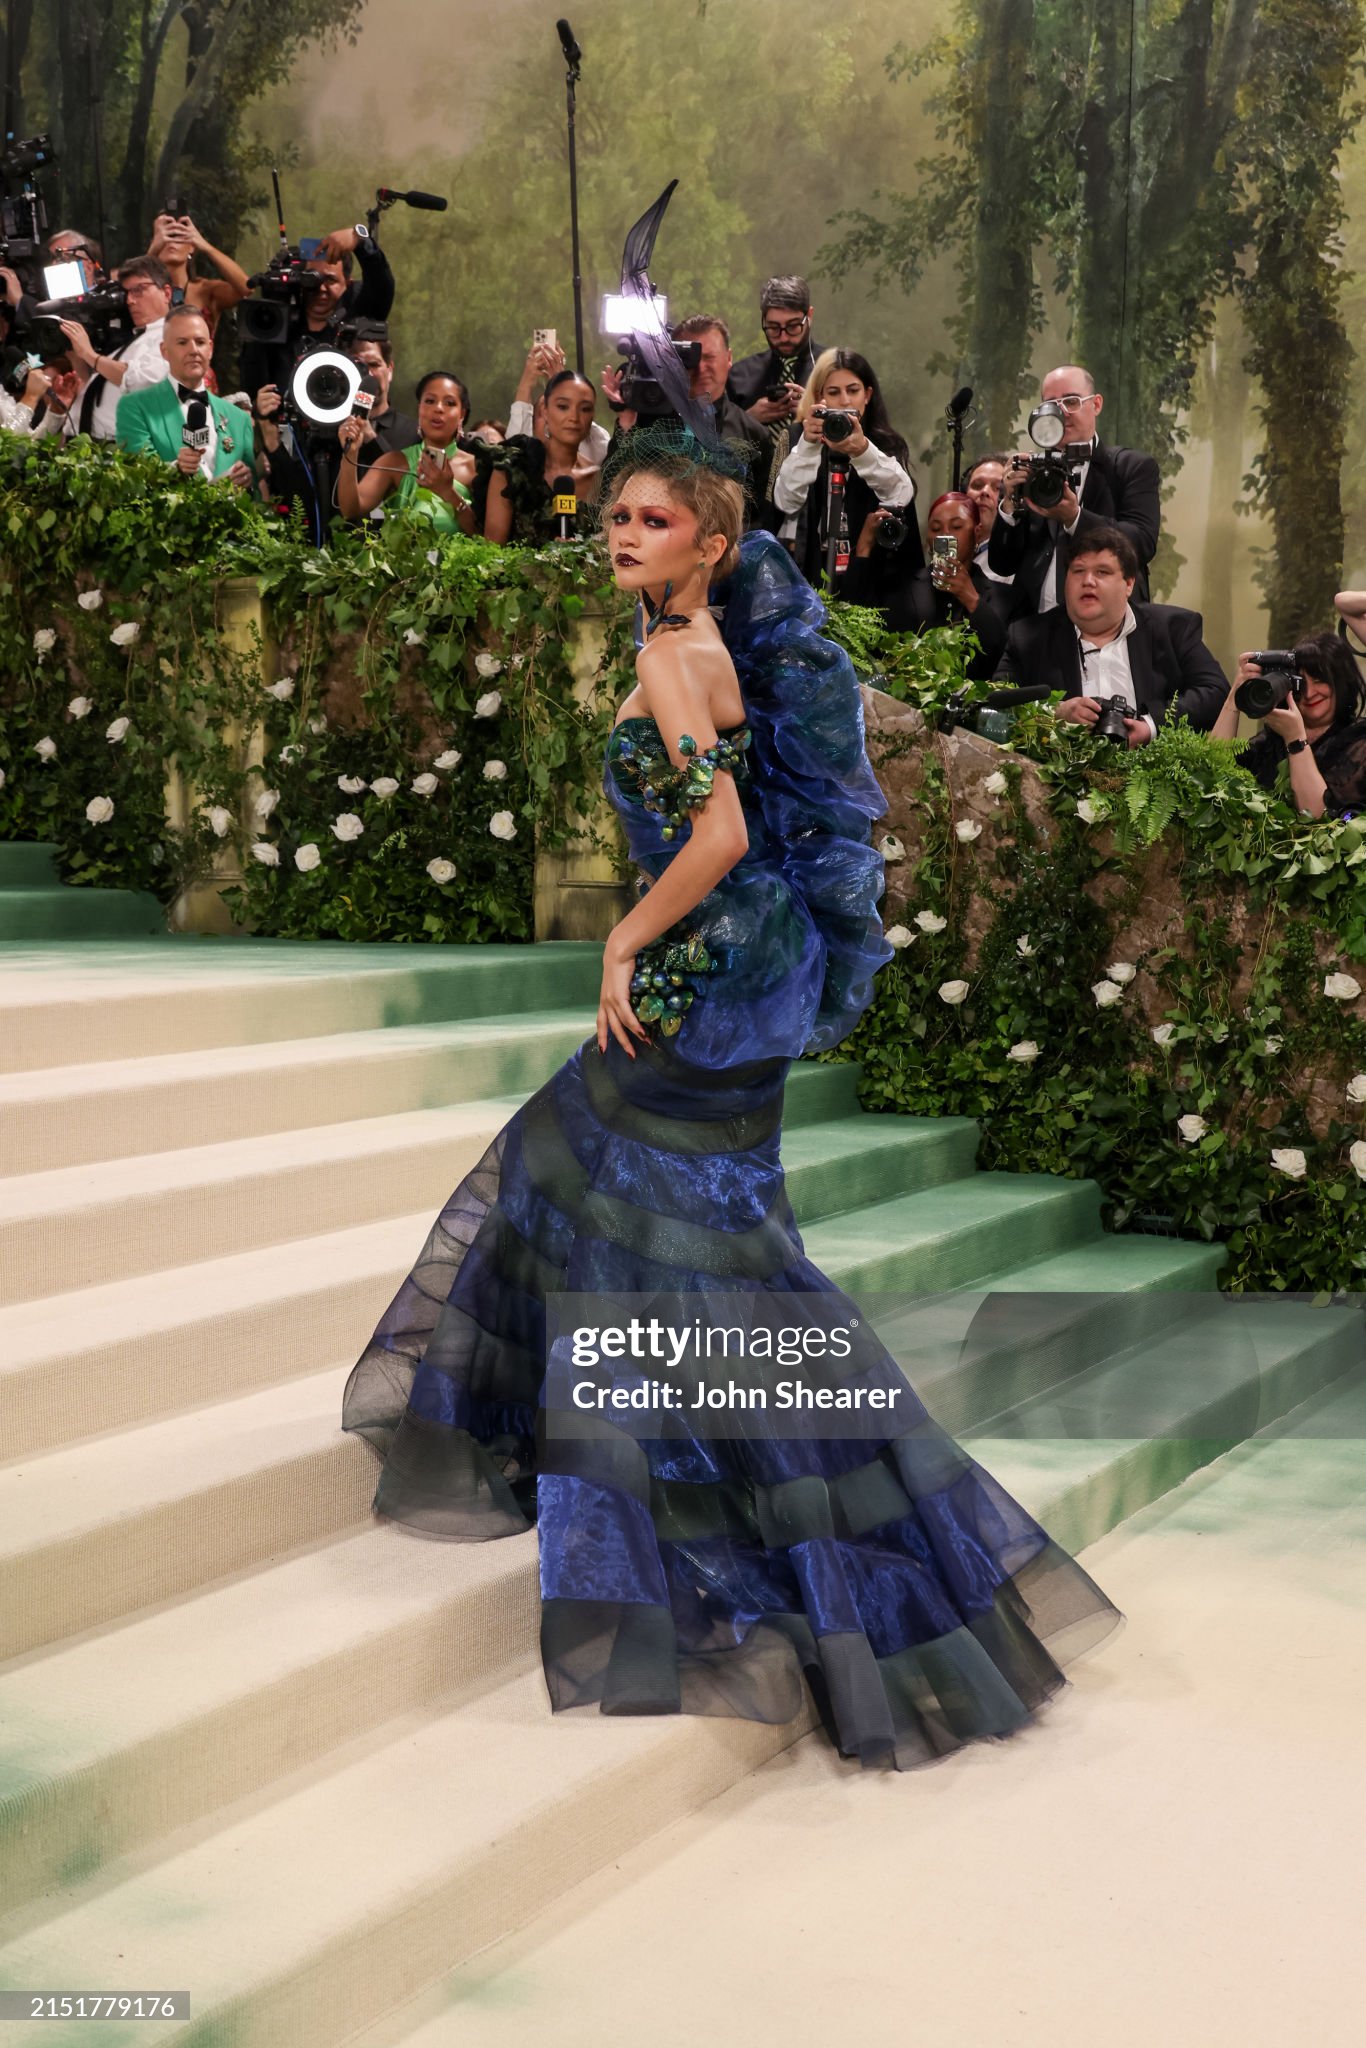 gettyimages-2151779176-2048x2048.jpg